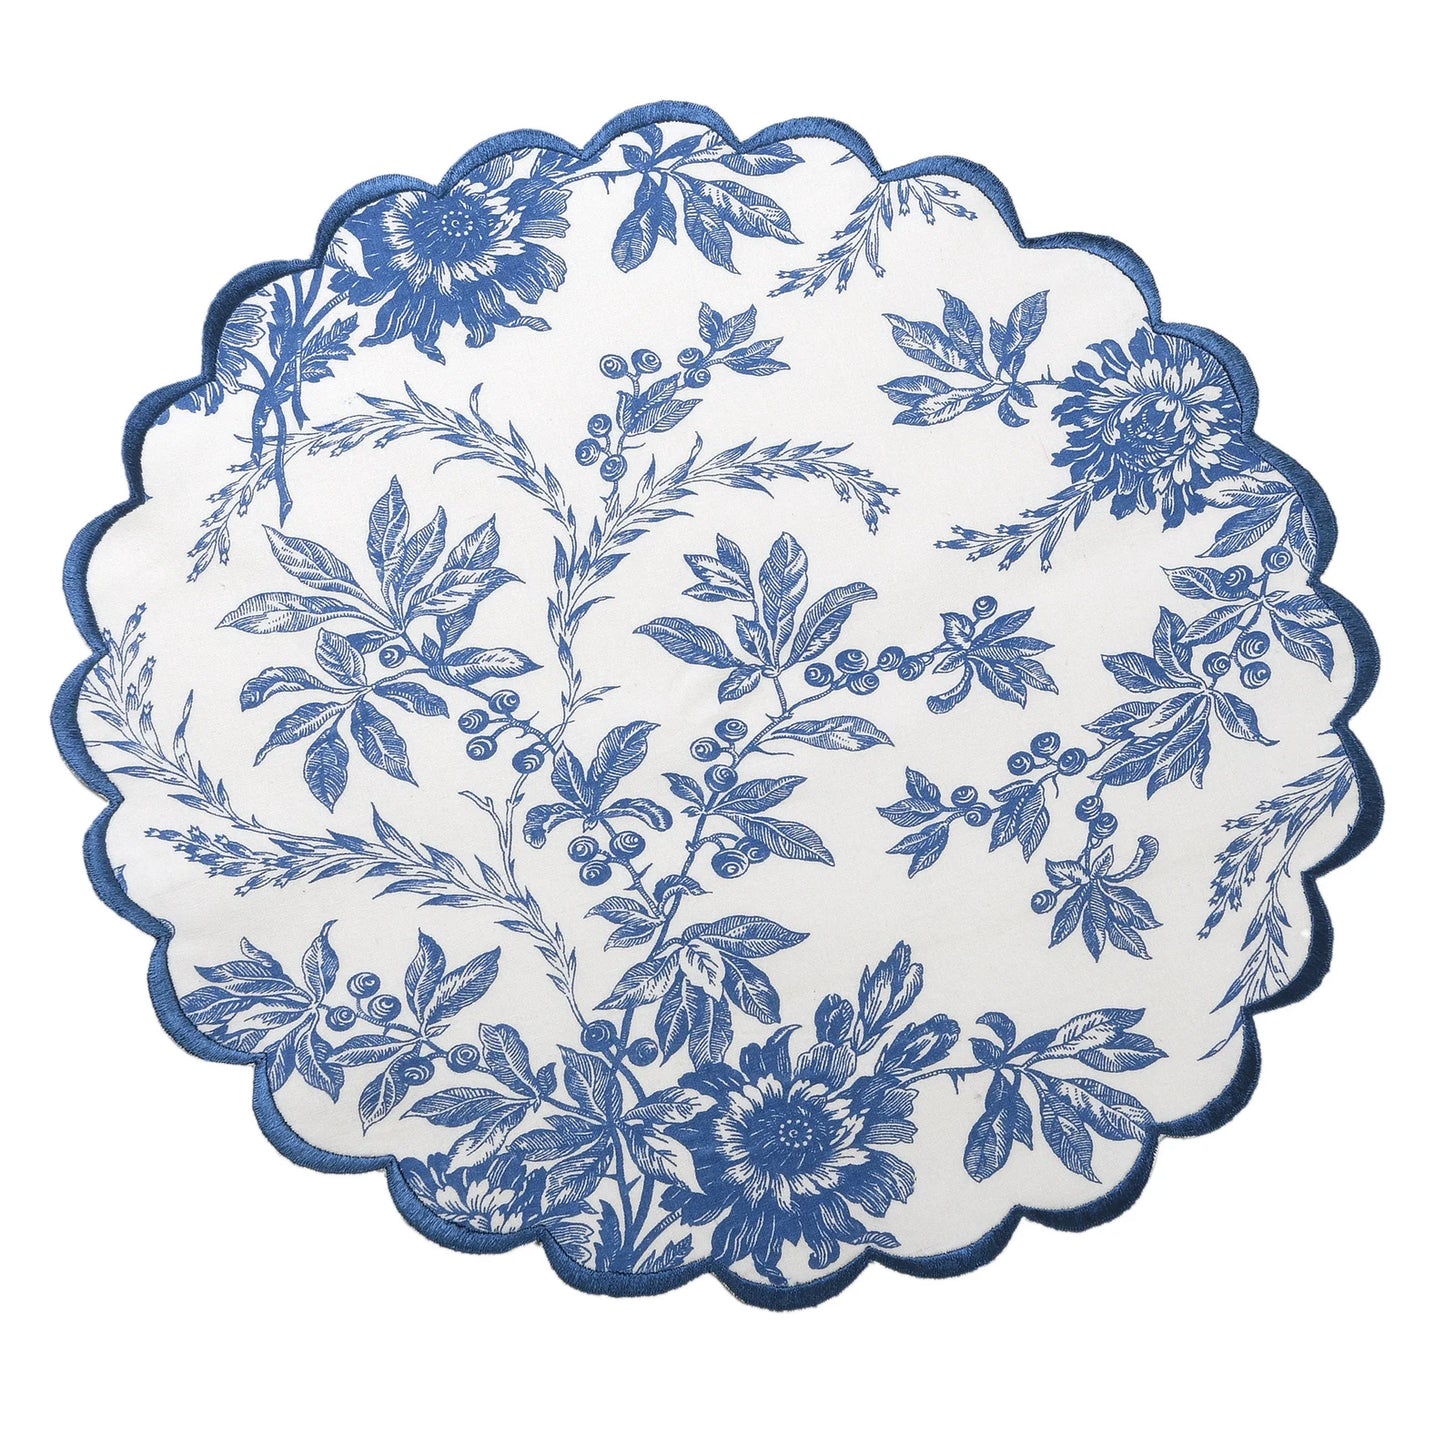 Set of 4 I Blue Chinoiserie Round Scalloped Edge Embroidered Placemat I Table Mats I Cotton Placemat I Table Linen I Tablecloth - DharBazaar